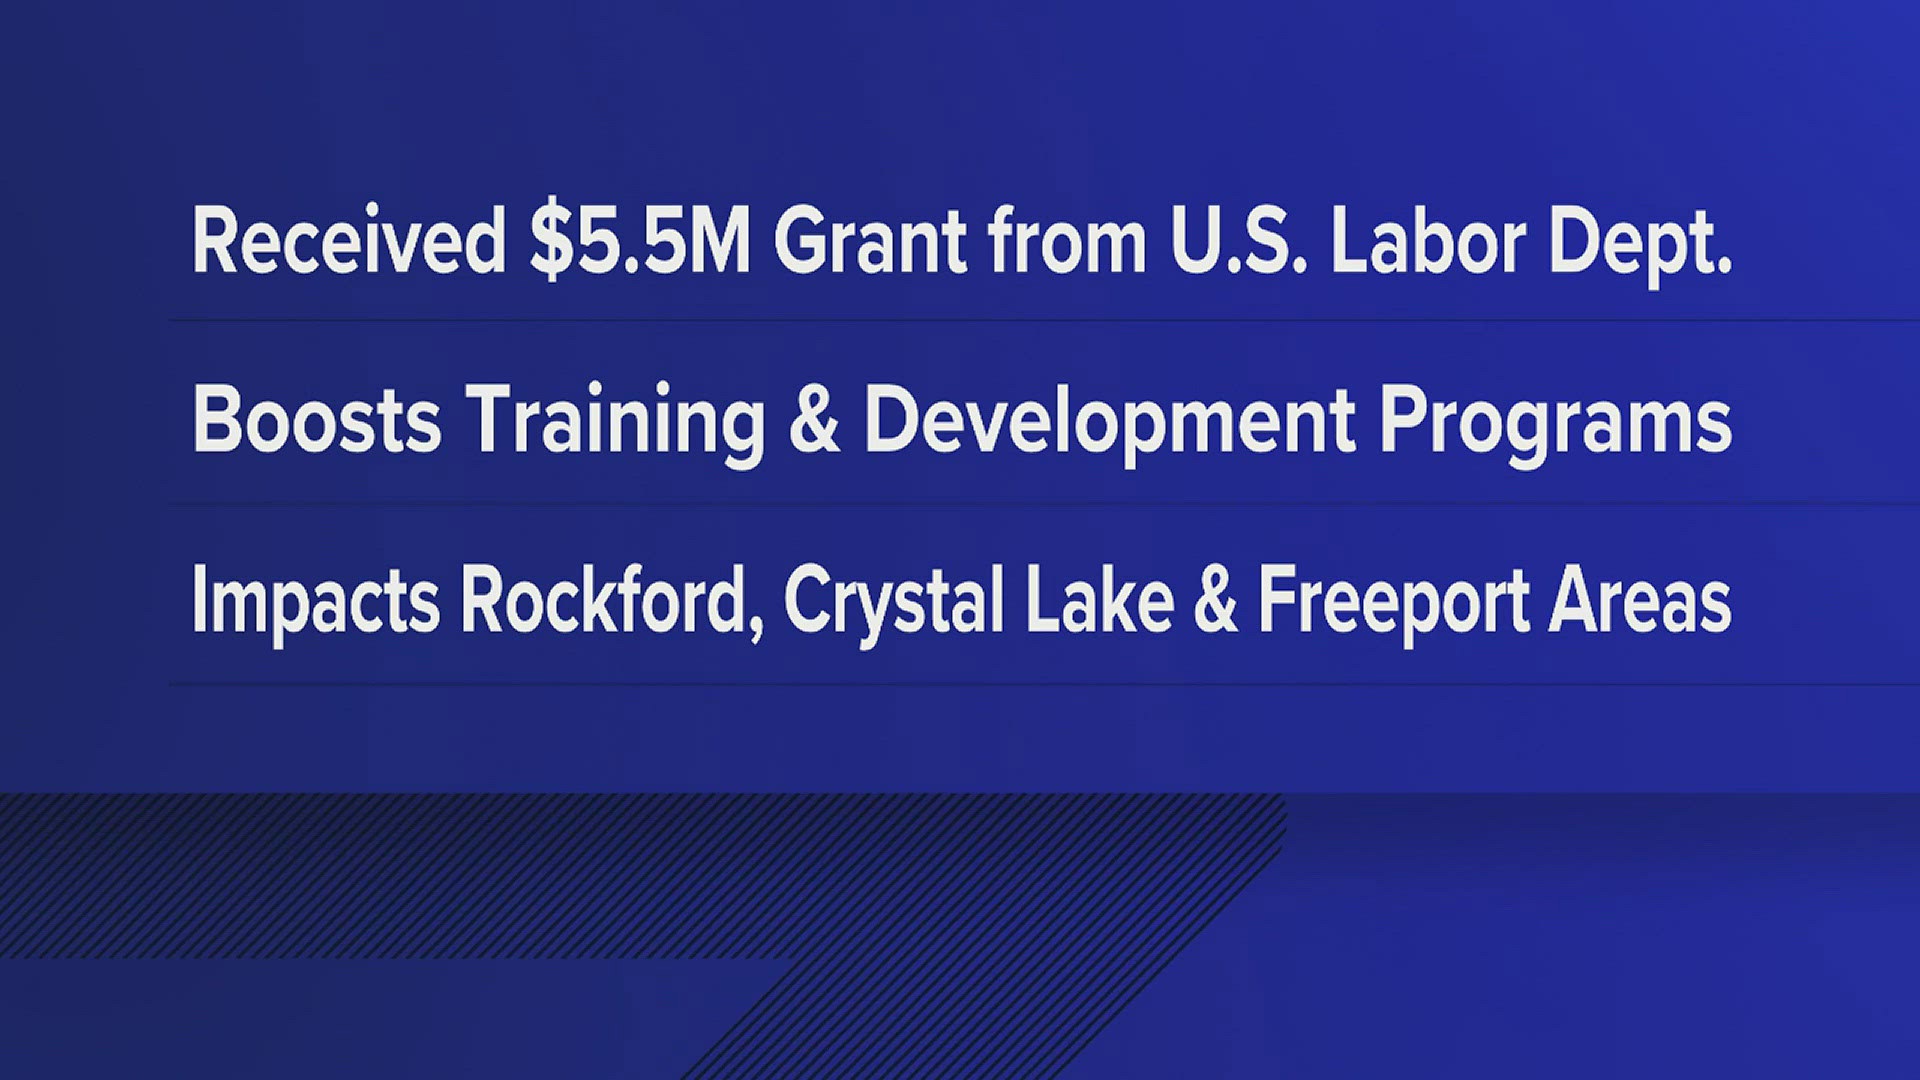 The board received a $5 million grant from the U.S. Department of Labor for those efforts.